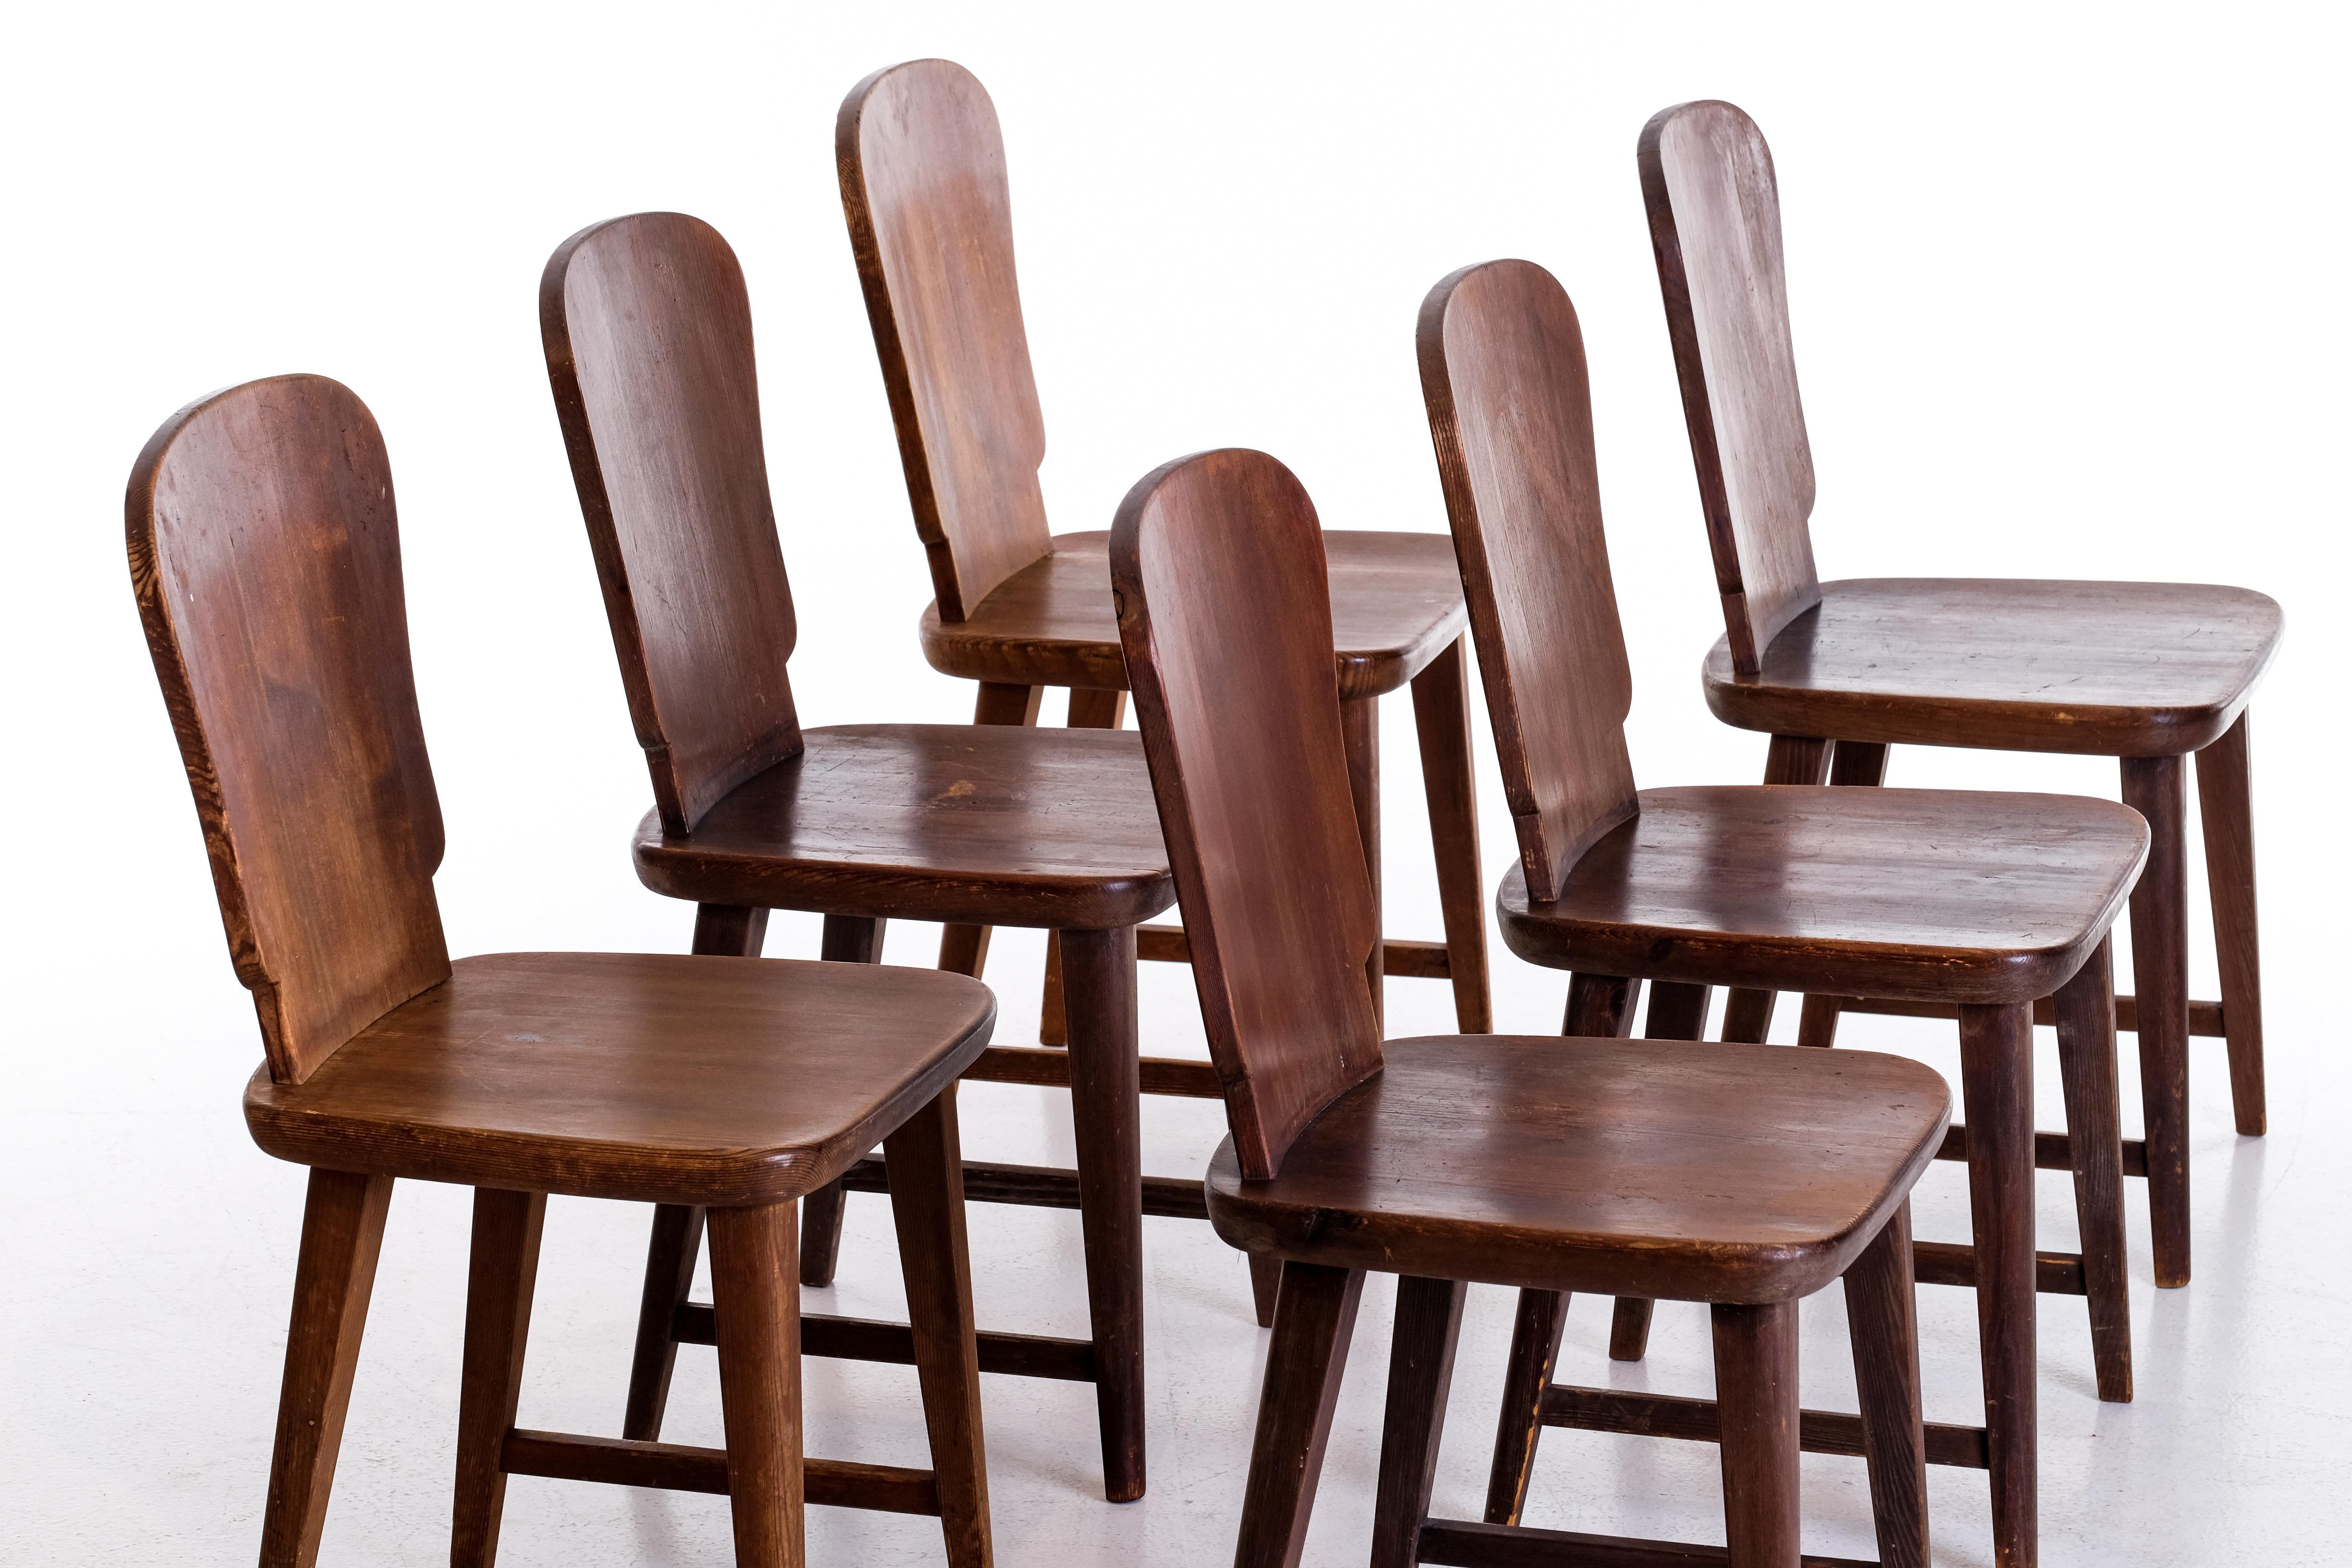 Rare Set of 6 Swedish Pine Chairs, 1940s In Good Condition For Sale In Stockholm, SE